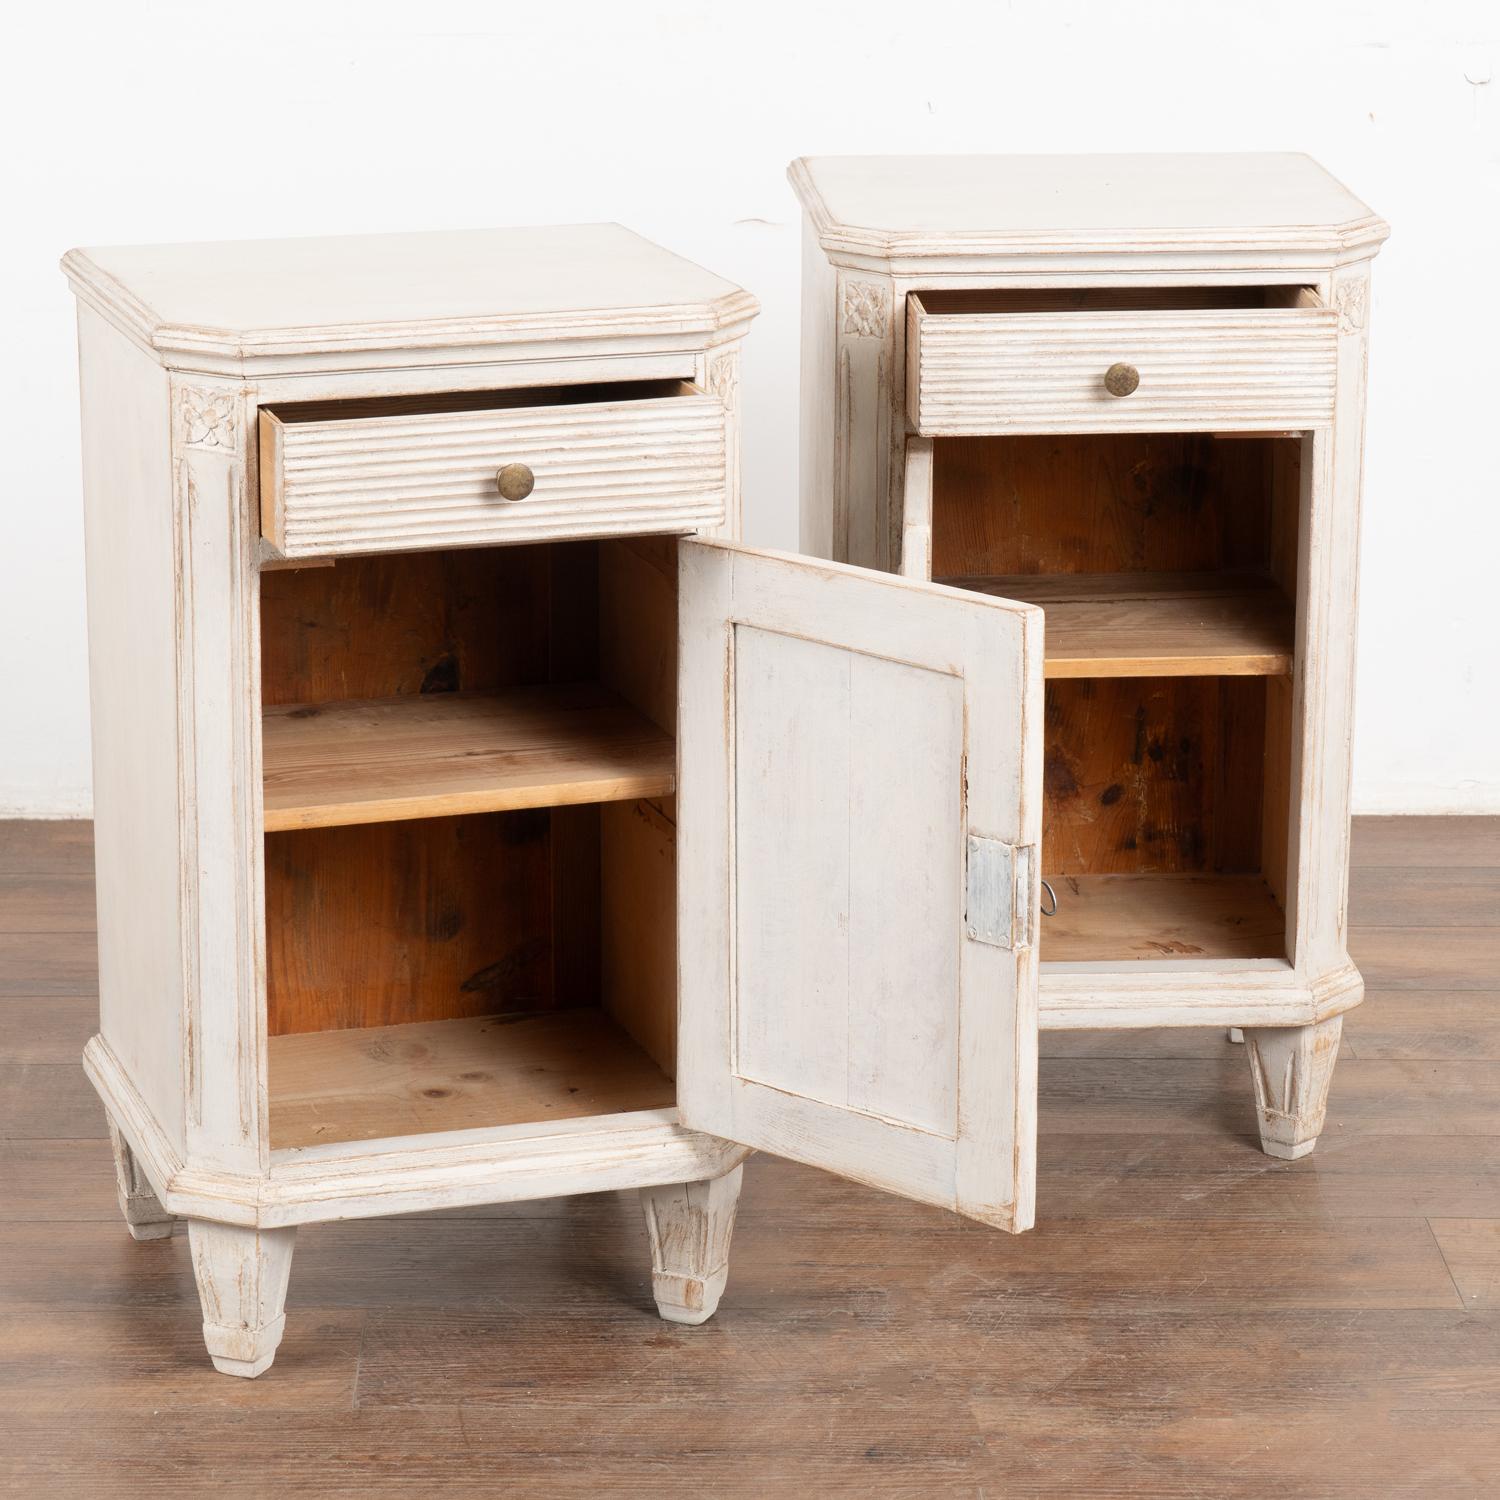 Country Pair of White Pine Nightstands Small Cabinets, Sweden circa 1900 For Sale